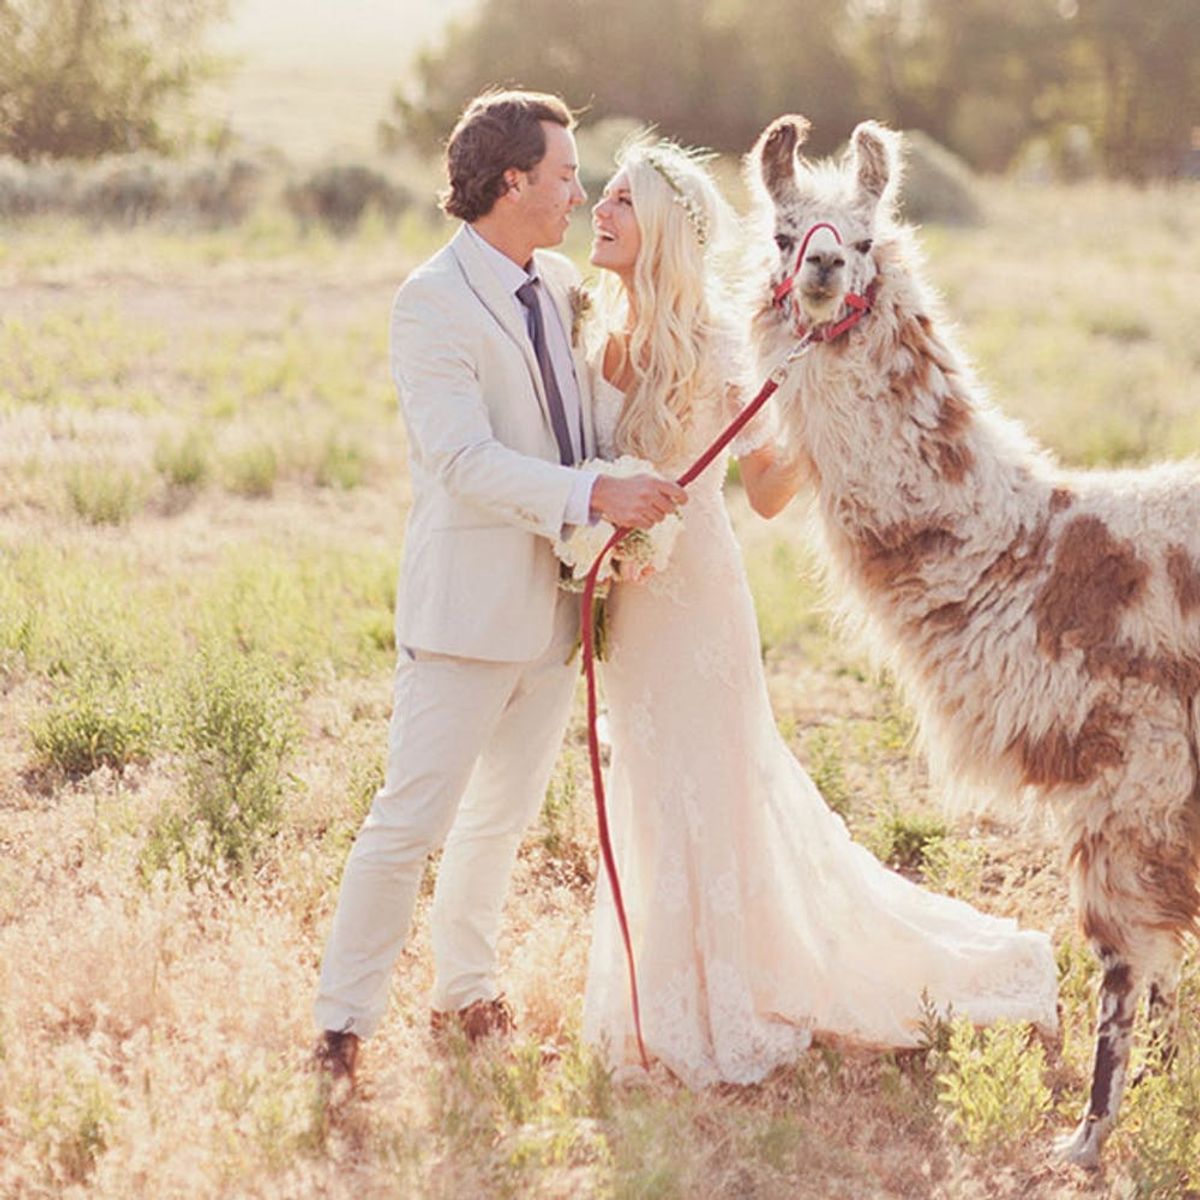 Llamas Are the Furriest New Wedding Trend